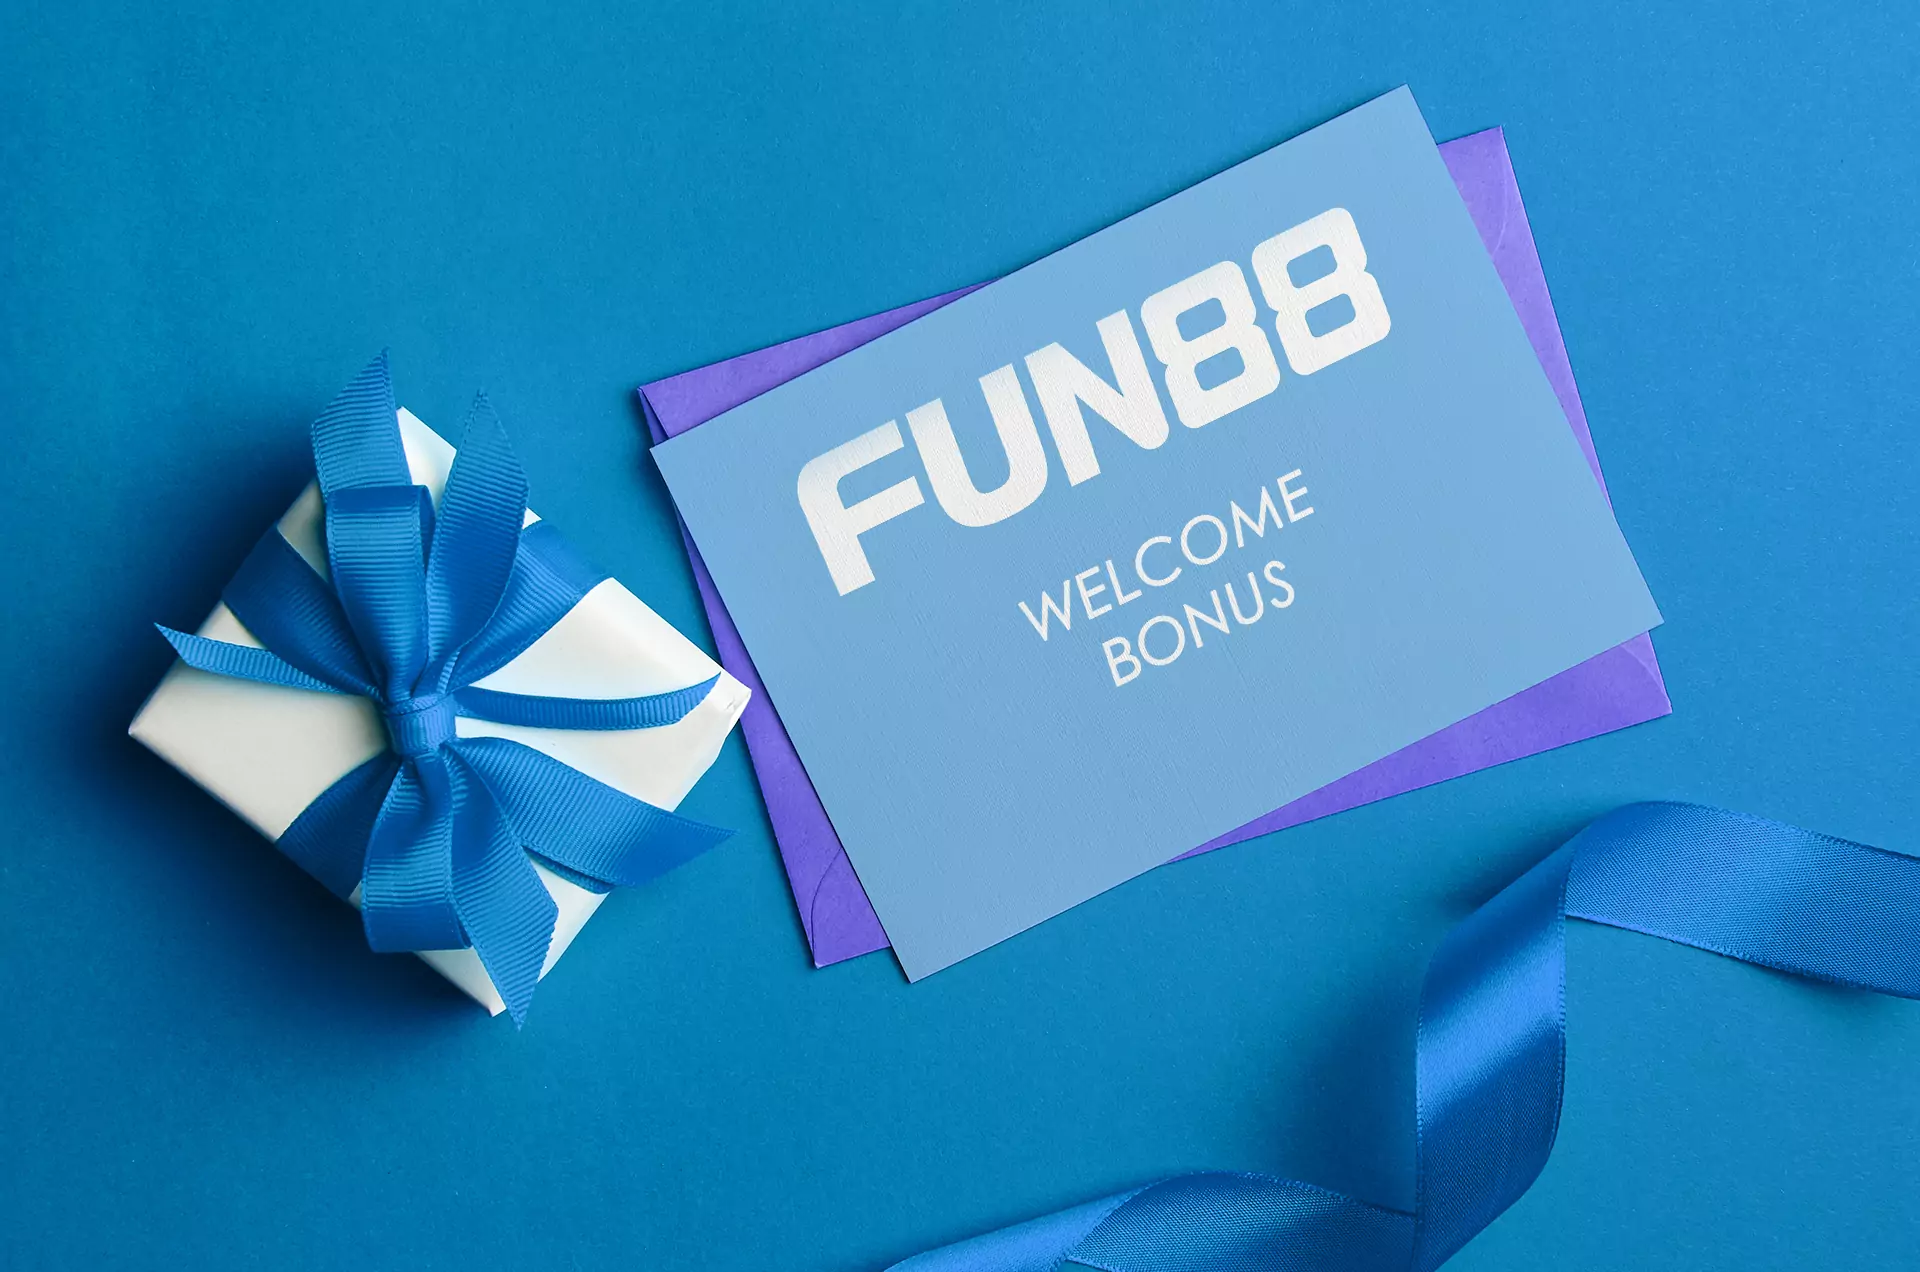 Fun88 has some welcome bonuses for new users.